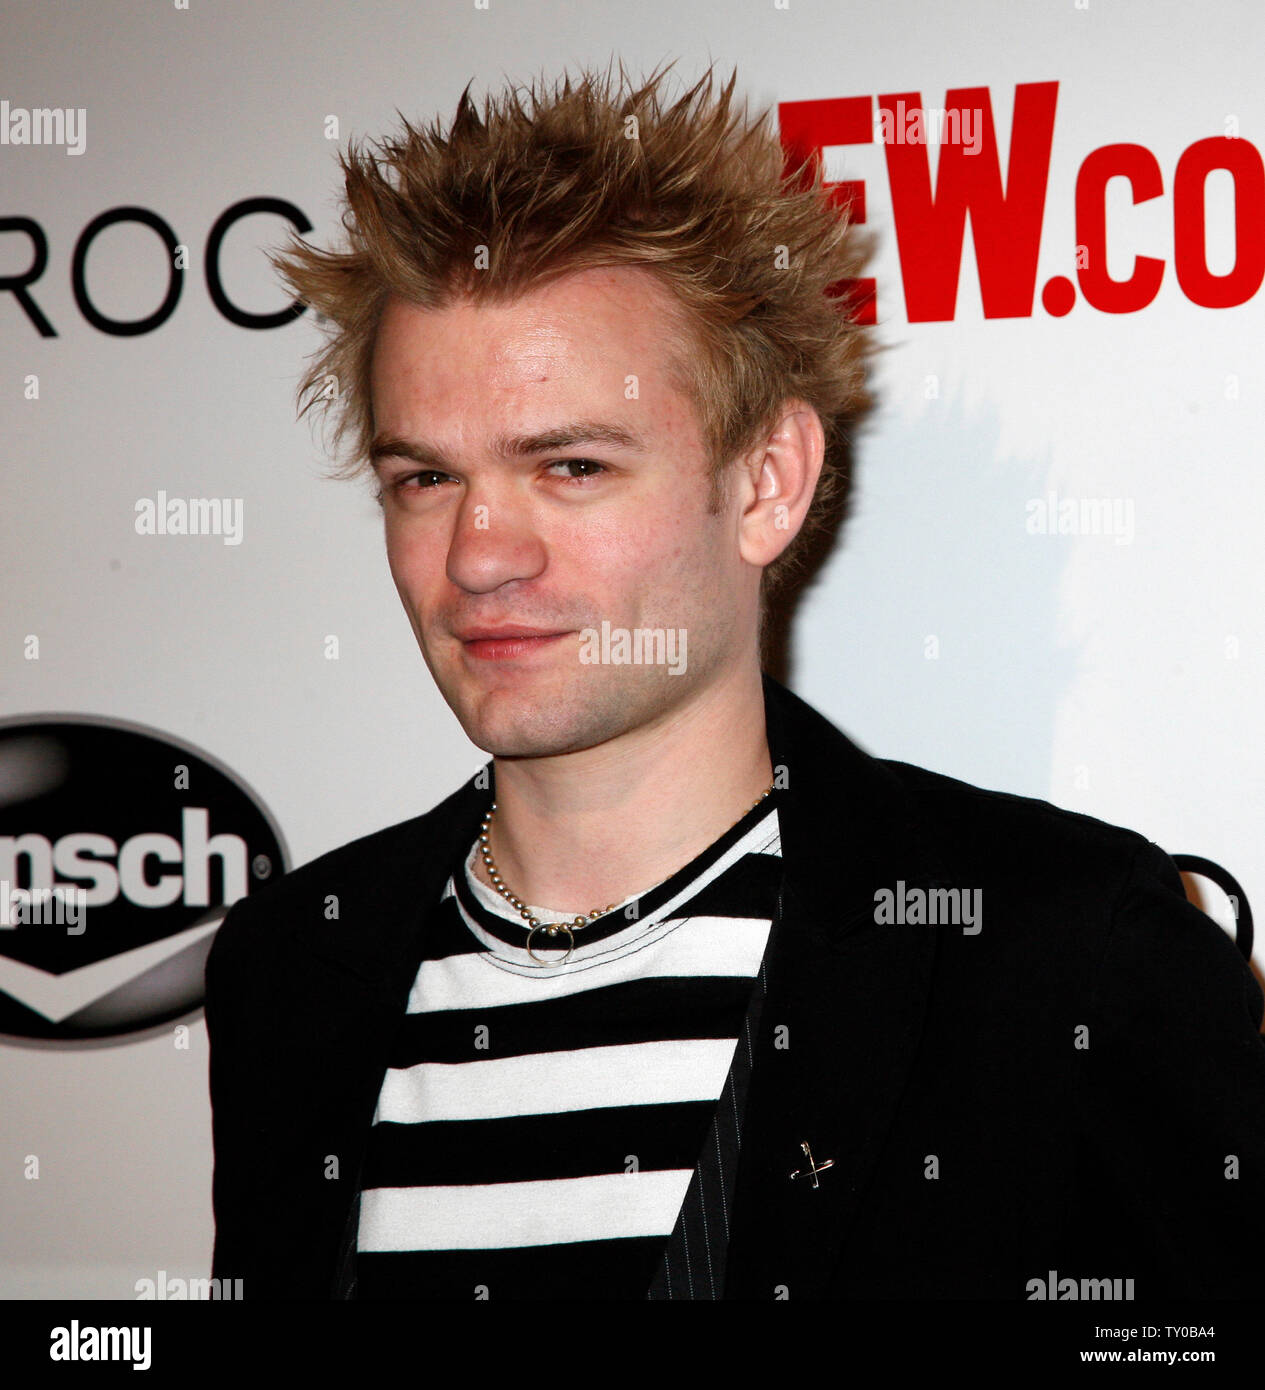 Sum 41 singer Deryck Whibley arrives for the Entertainment Weekly